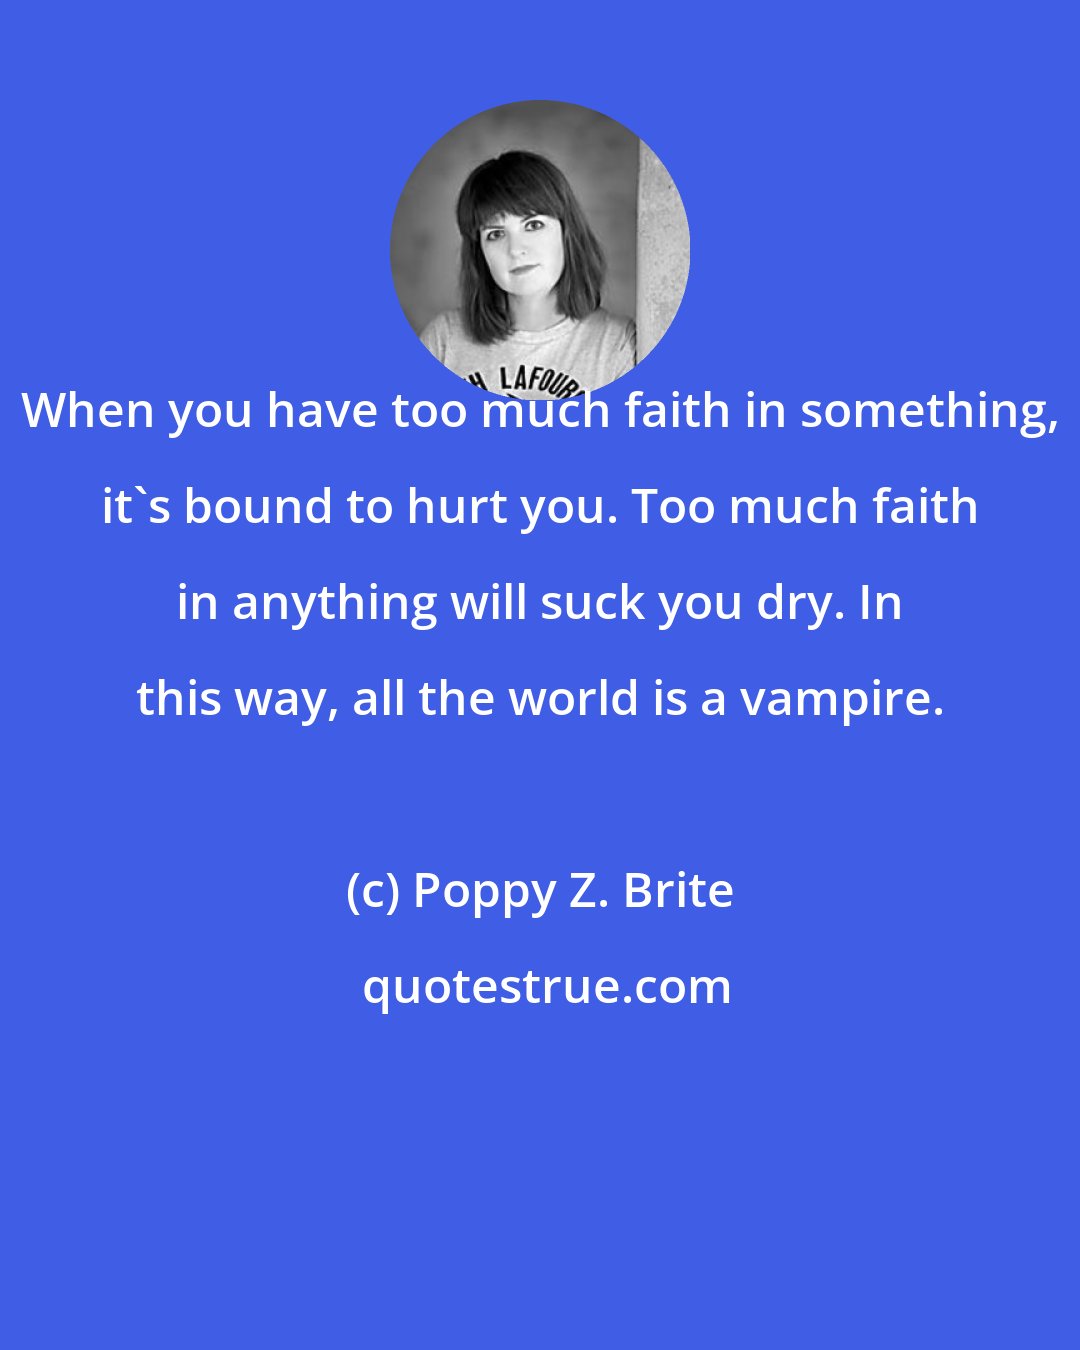 Poppy Z. Brite: When you have too much faith in something, it's bound to hurt you. Too much faith in anything will suck you dry. In this way, all the world is a vampire.